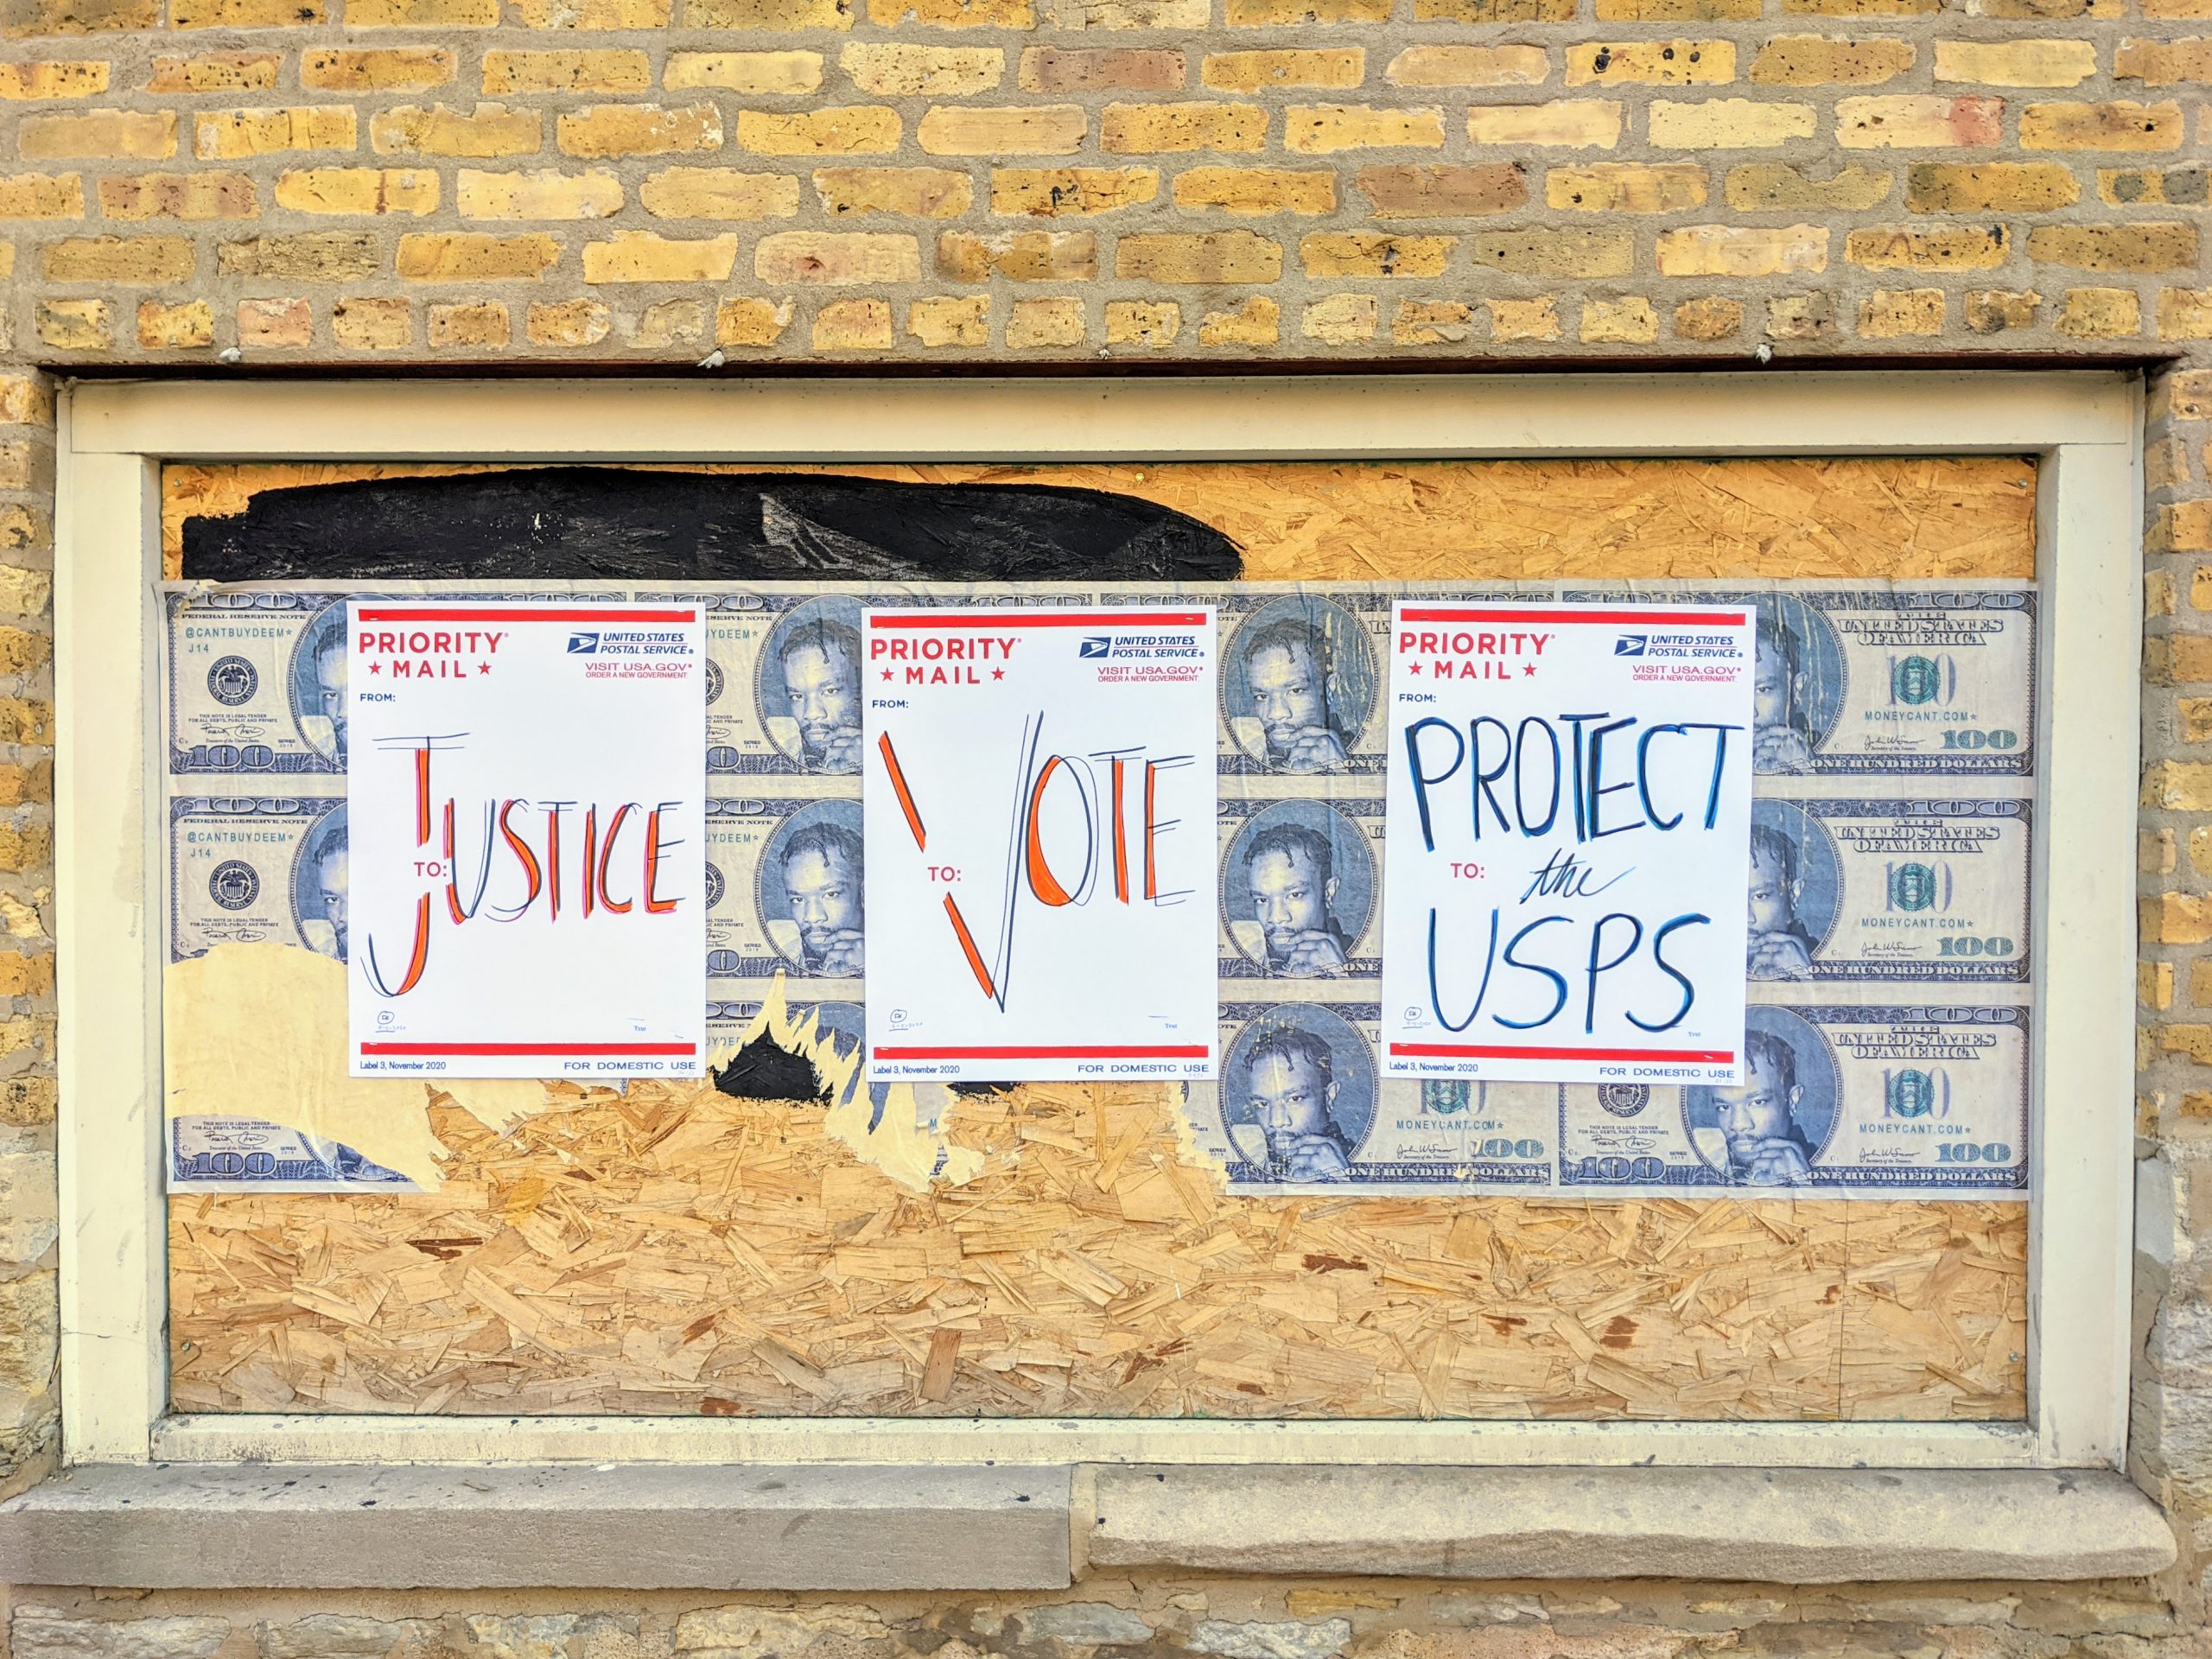 Art: VOTE / Save the USPS Poster Installation